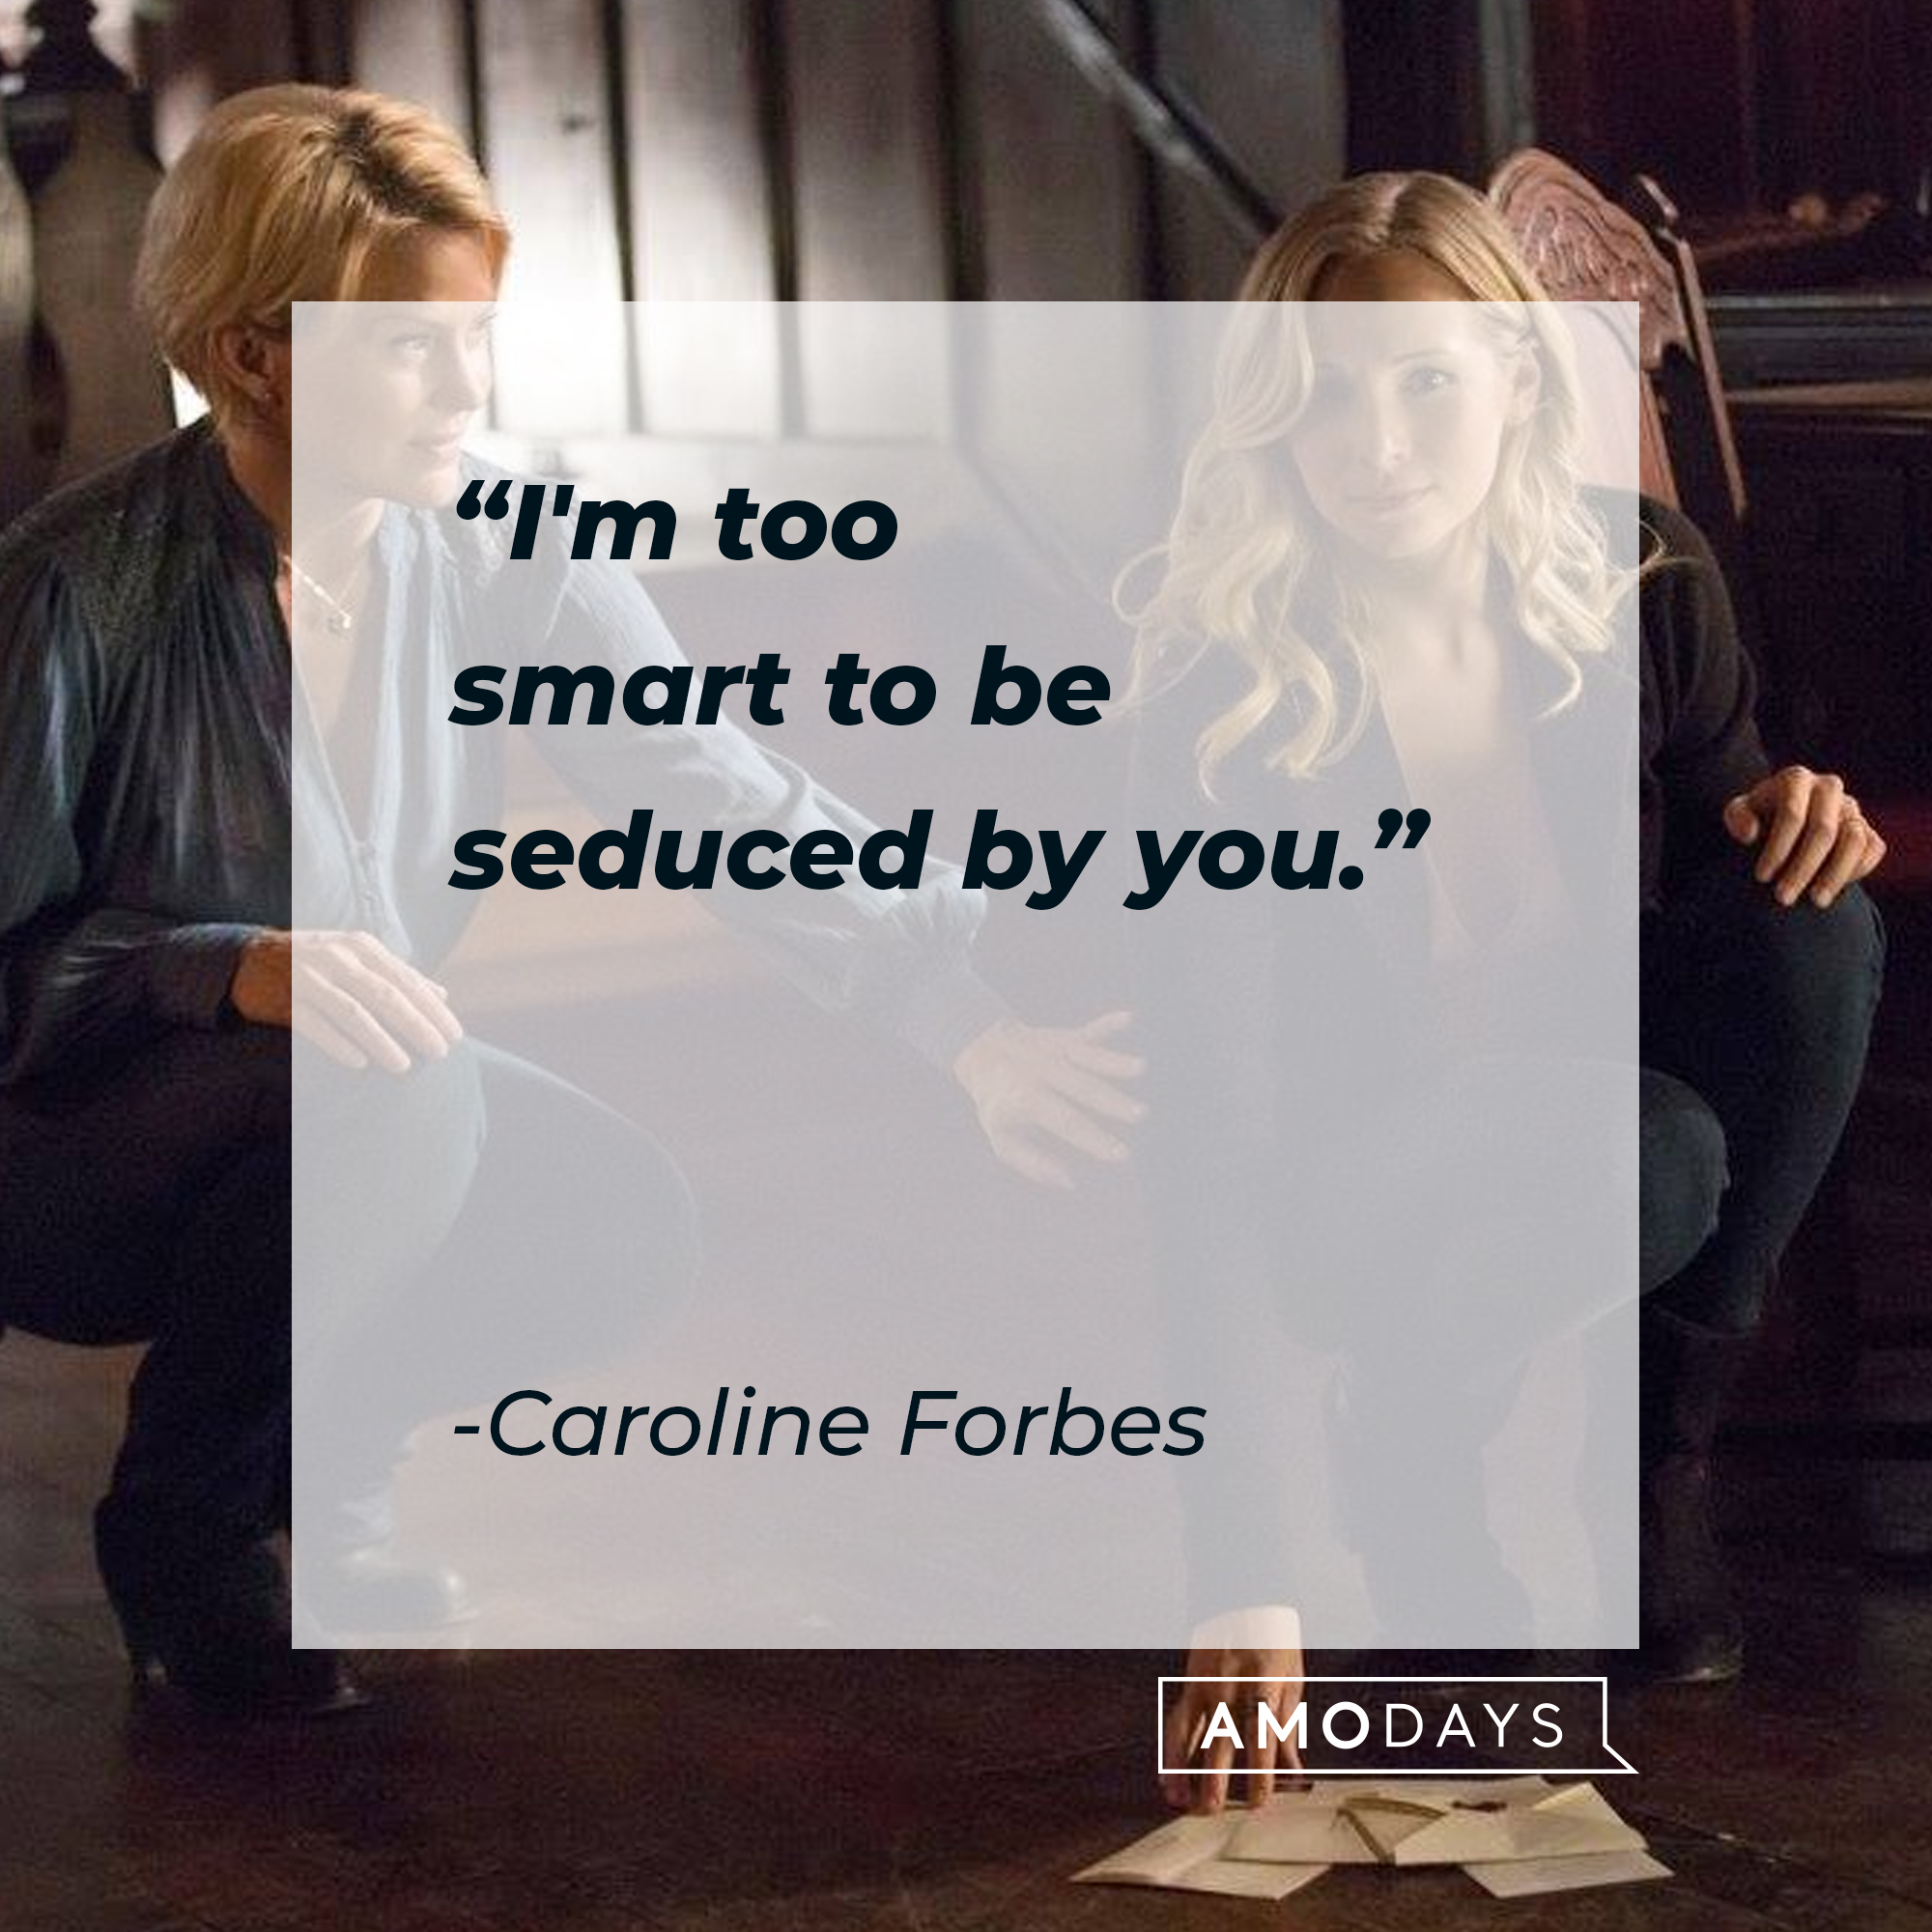 Caroline Forbes' quote: "I'm too smart to be seduced by you." | Source: Facebook.com/thevampirediaries